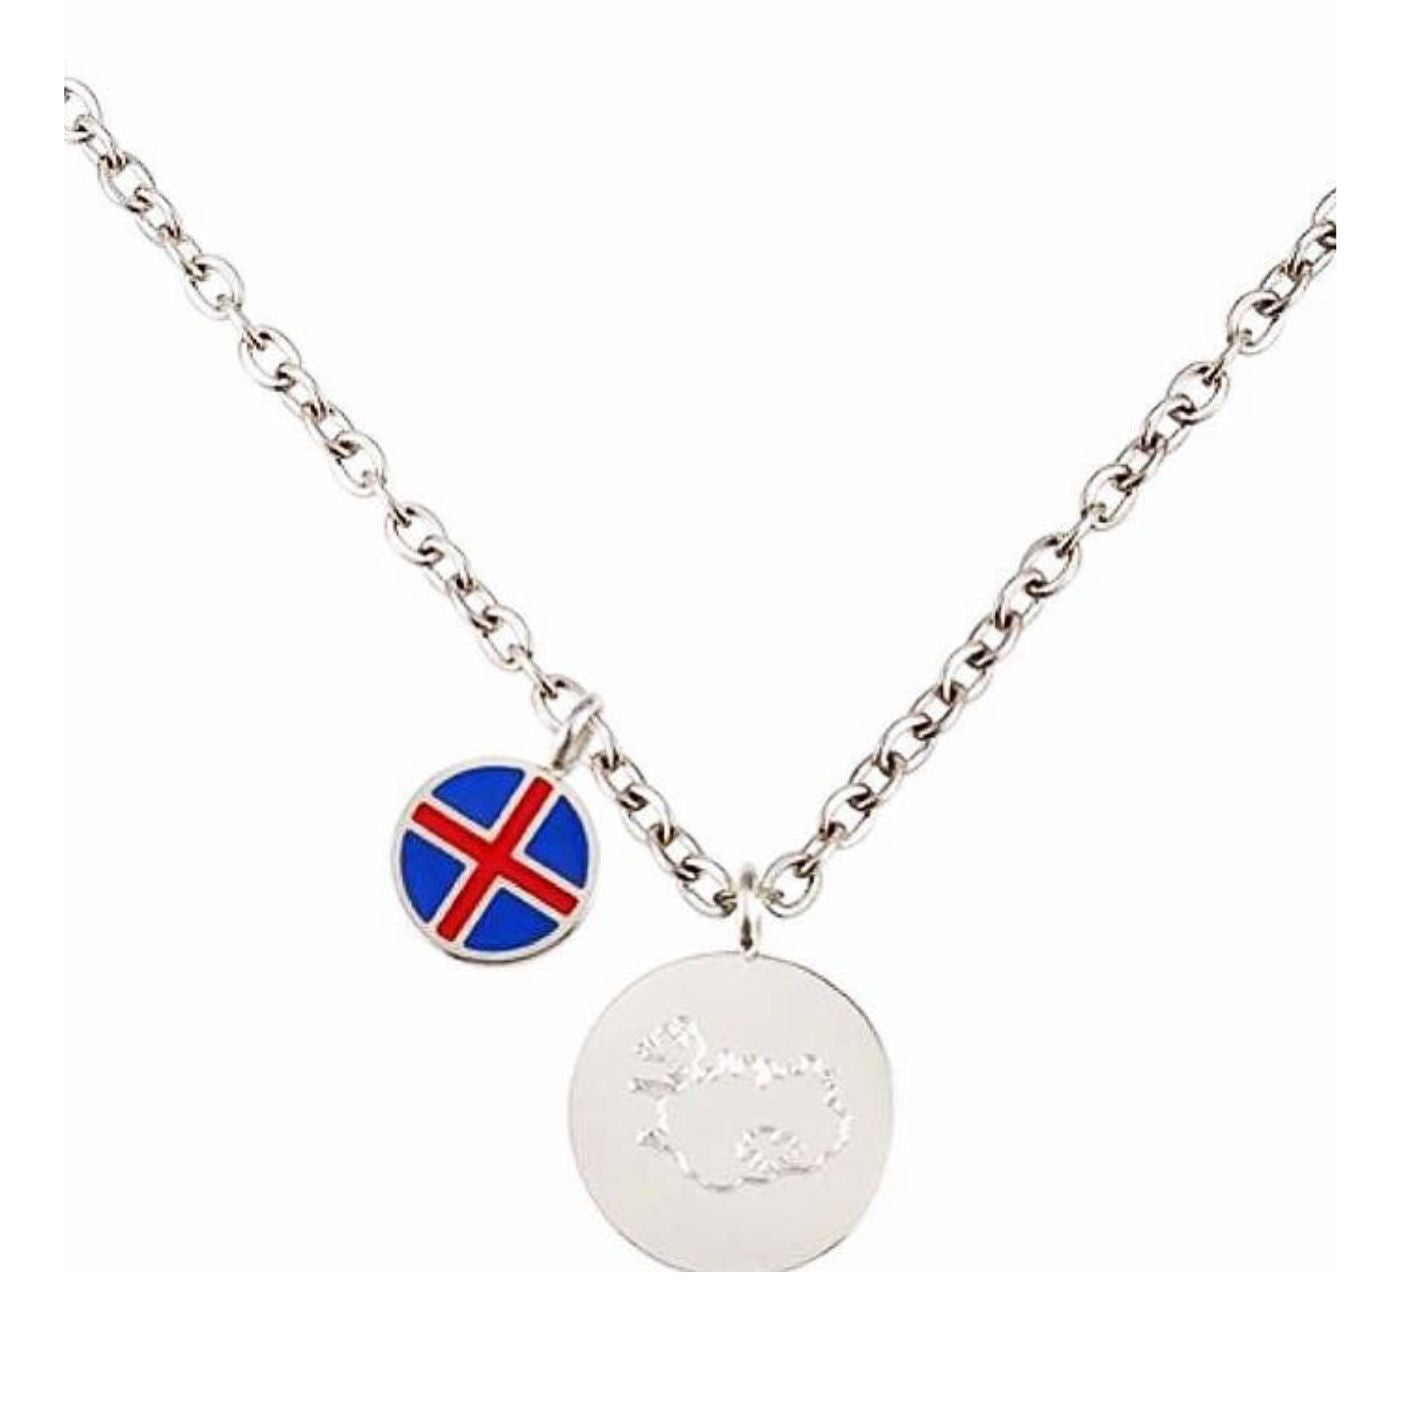 Iceland with flag necklase